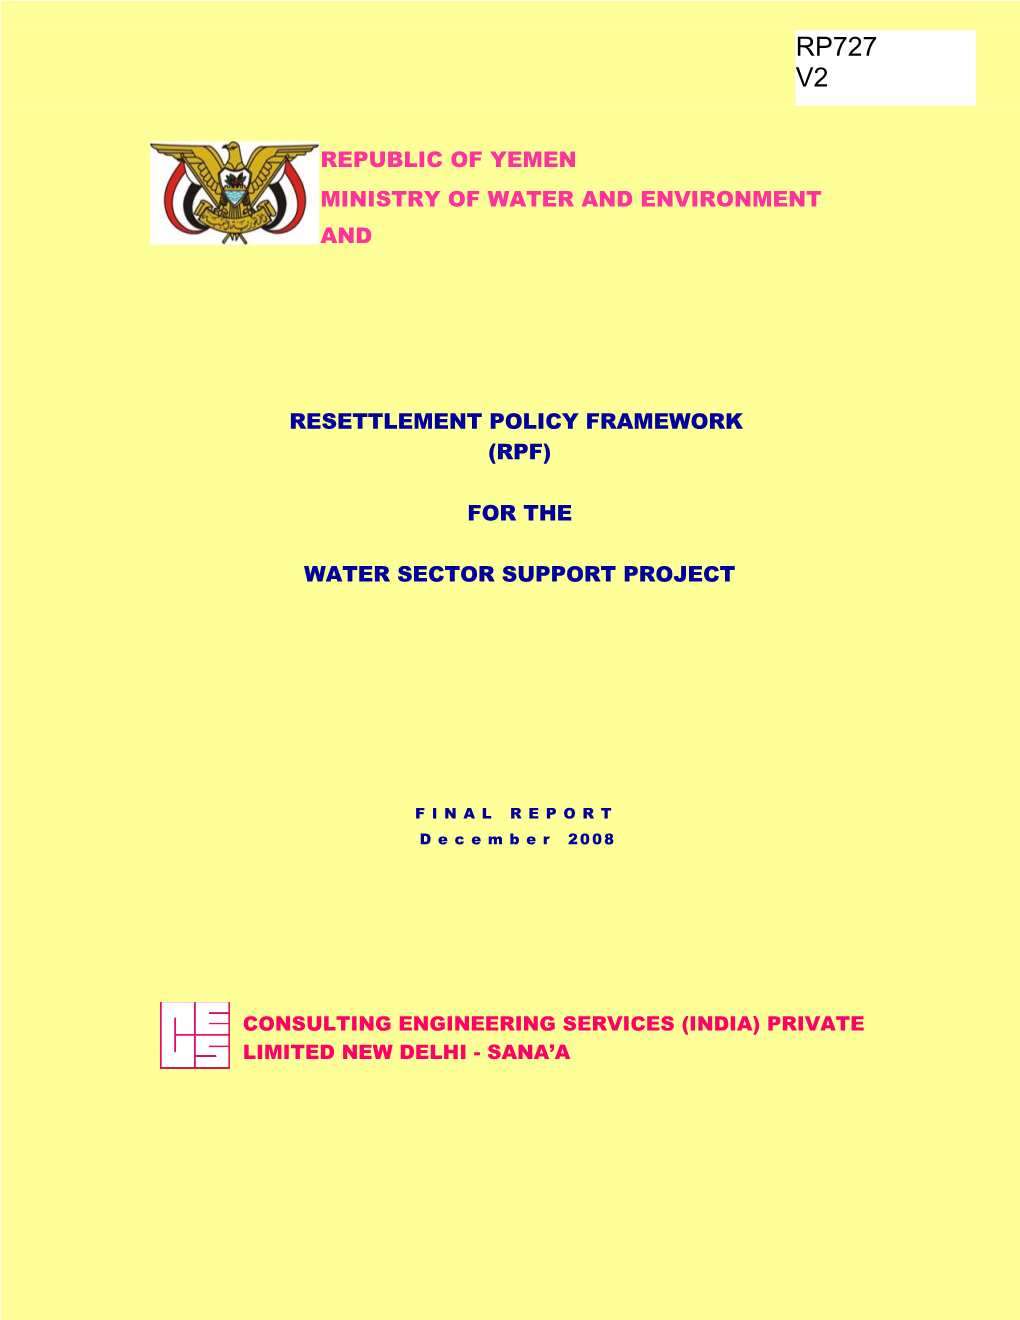 Water Sector Support Project